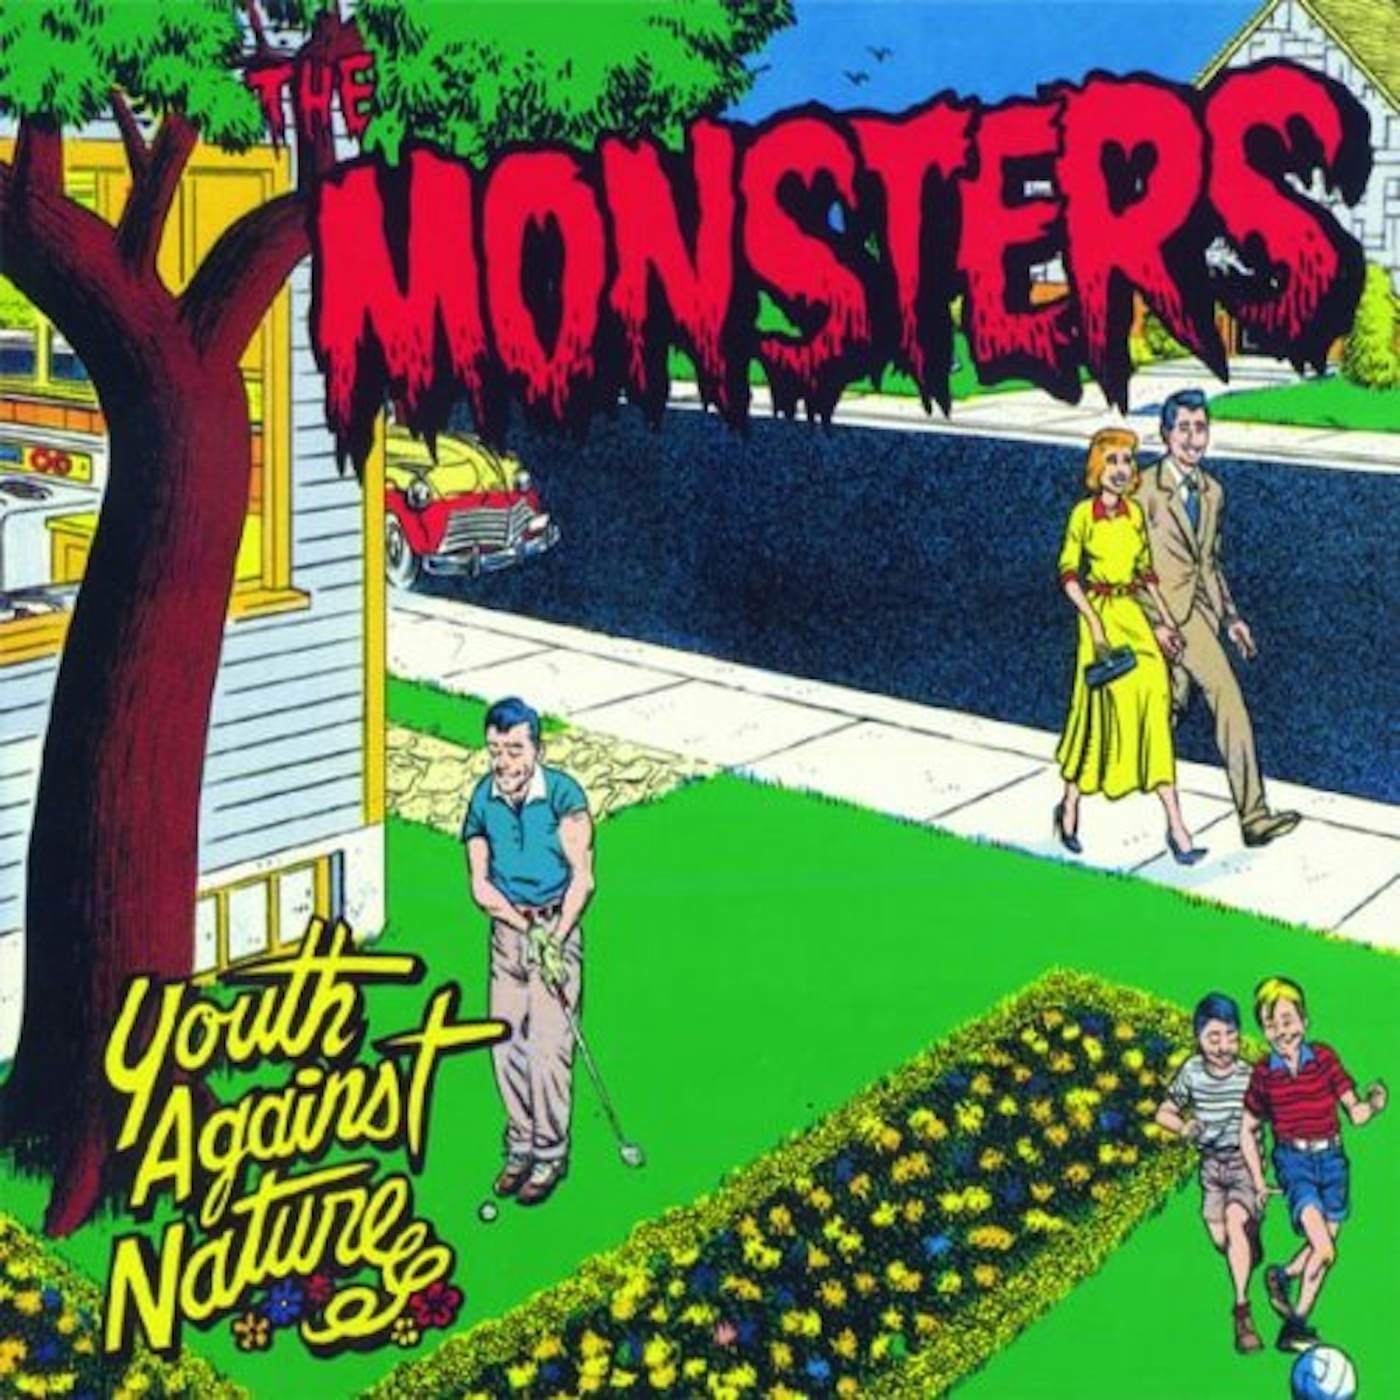 The Monsters YOUTH AGAINST NATURE CD